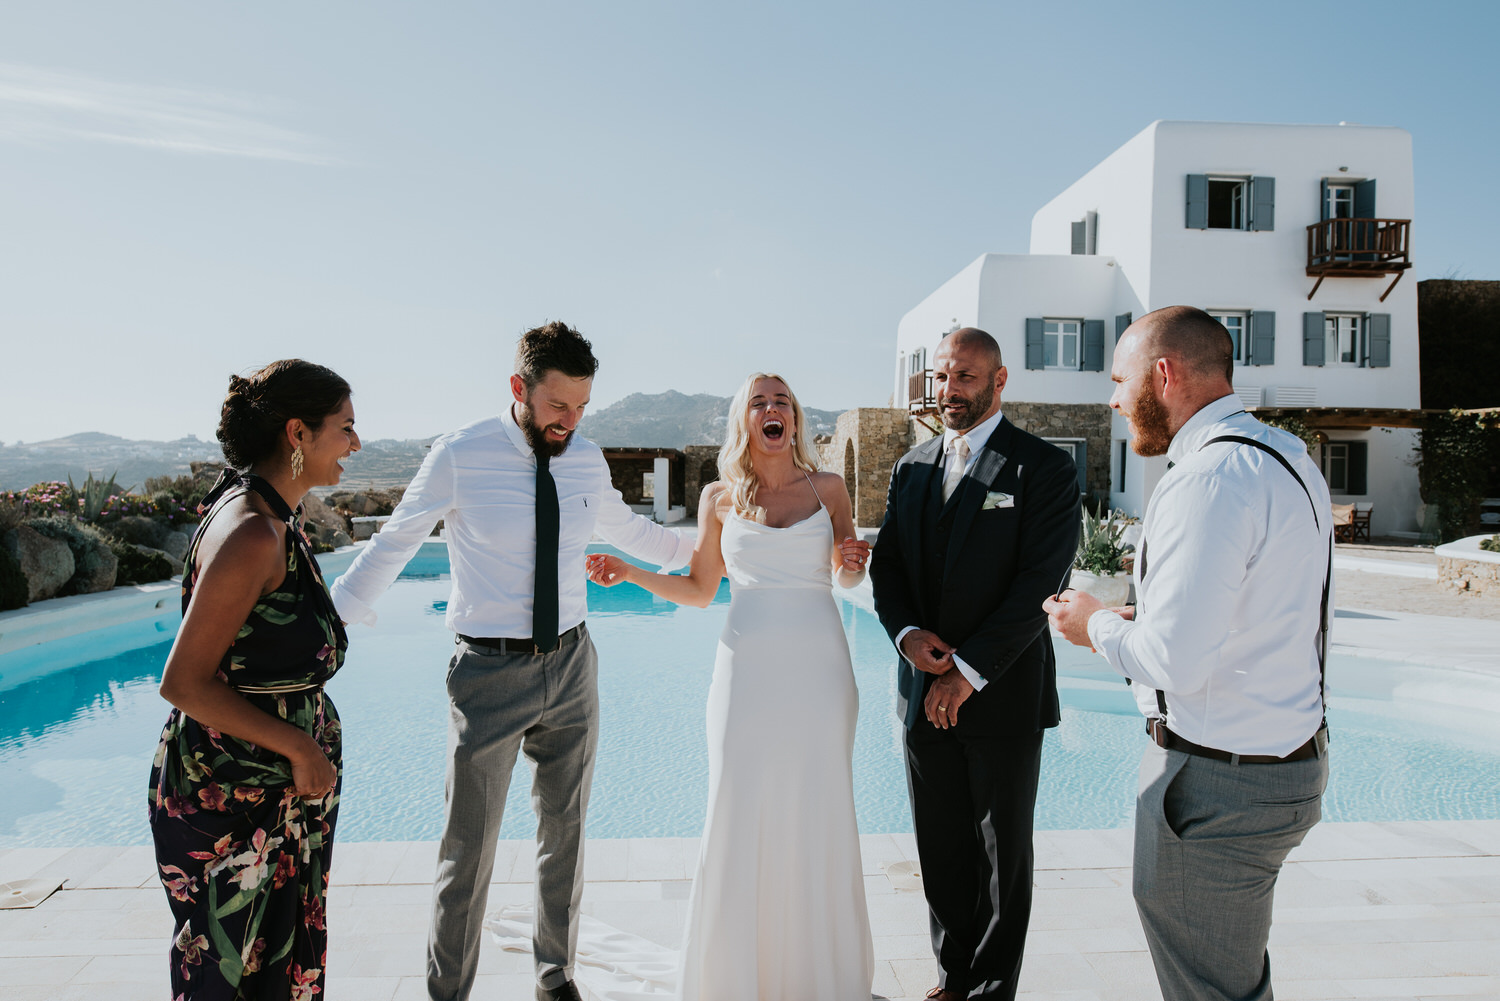 Mykonos wedding photographer: bride and groom with their friends laughing next to the pool in afternoon light.